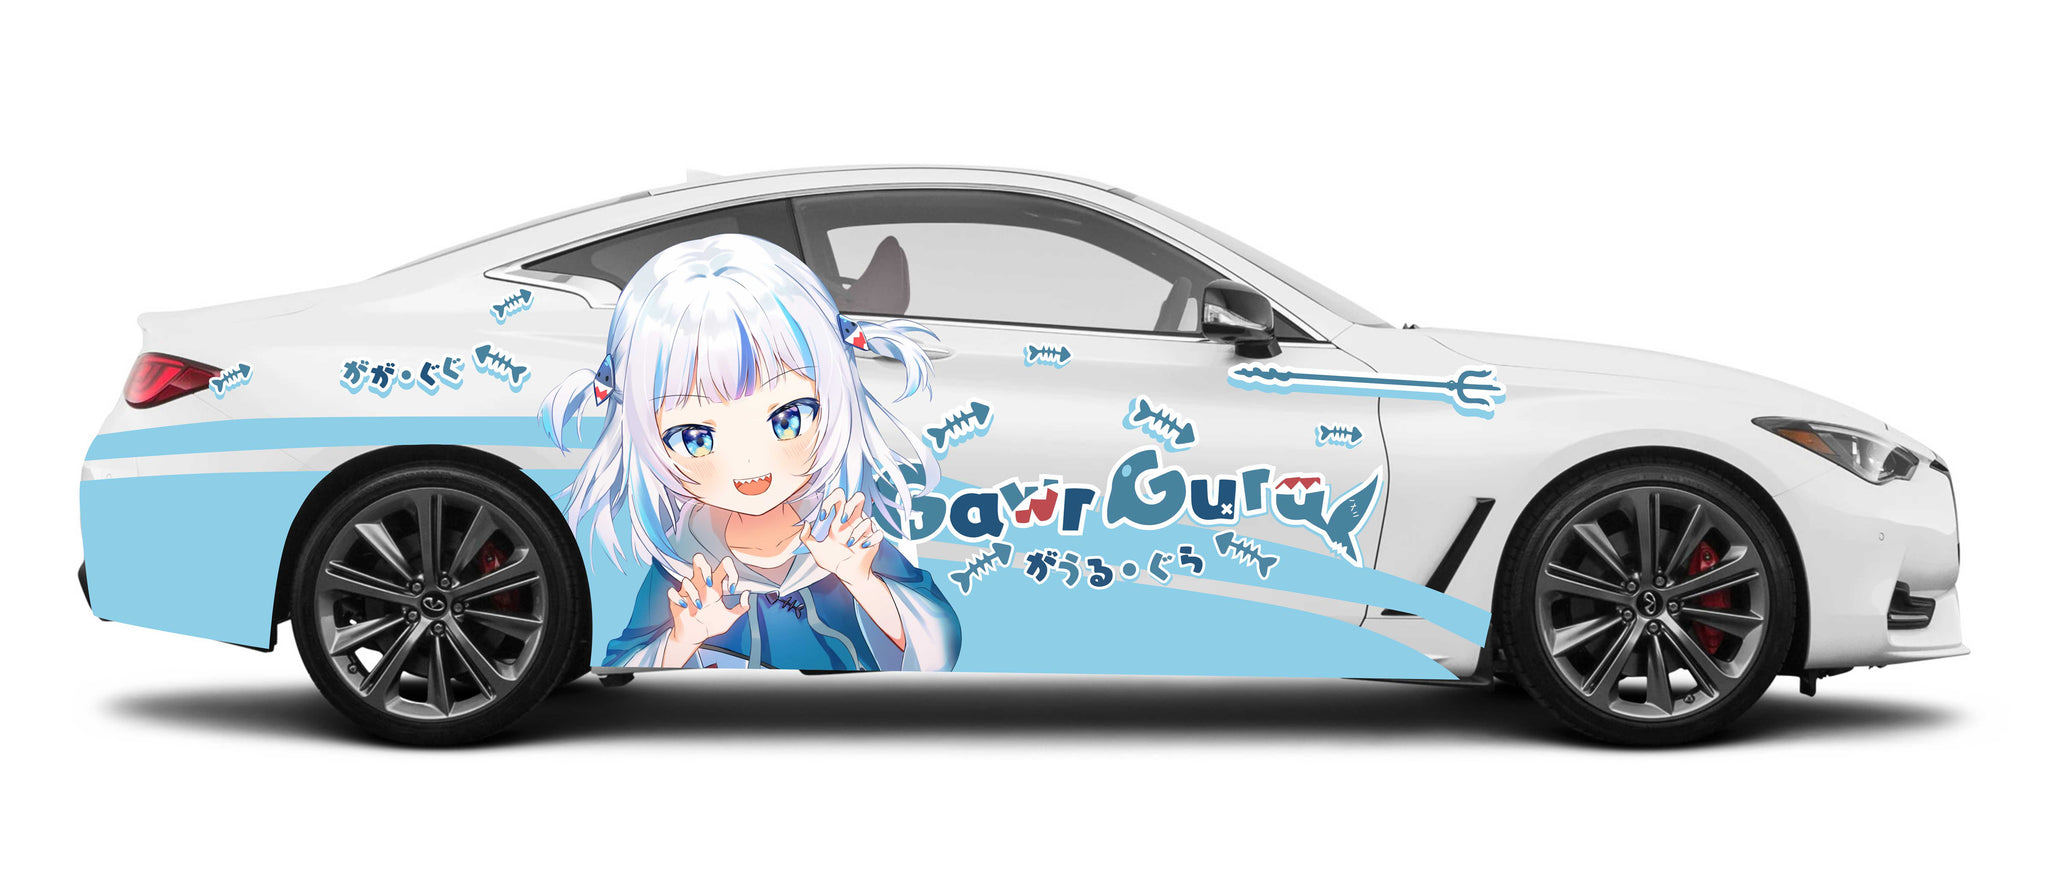 Anime Bleach Car Wrap Door Side Stickers Decal Fit With Any Cars Vinyl  Graphics Car Accessories Car Stickers Car Decal  Car Body Film  AliExpress